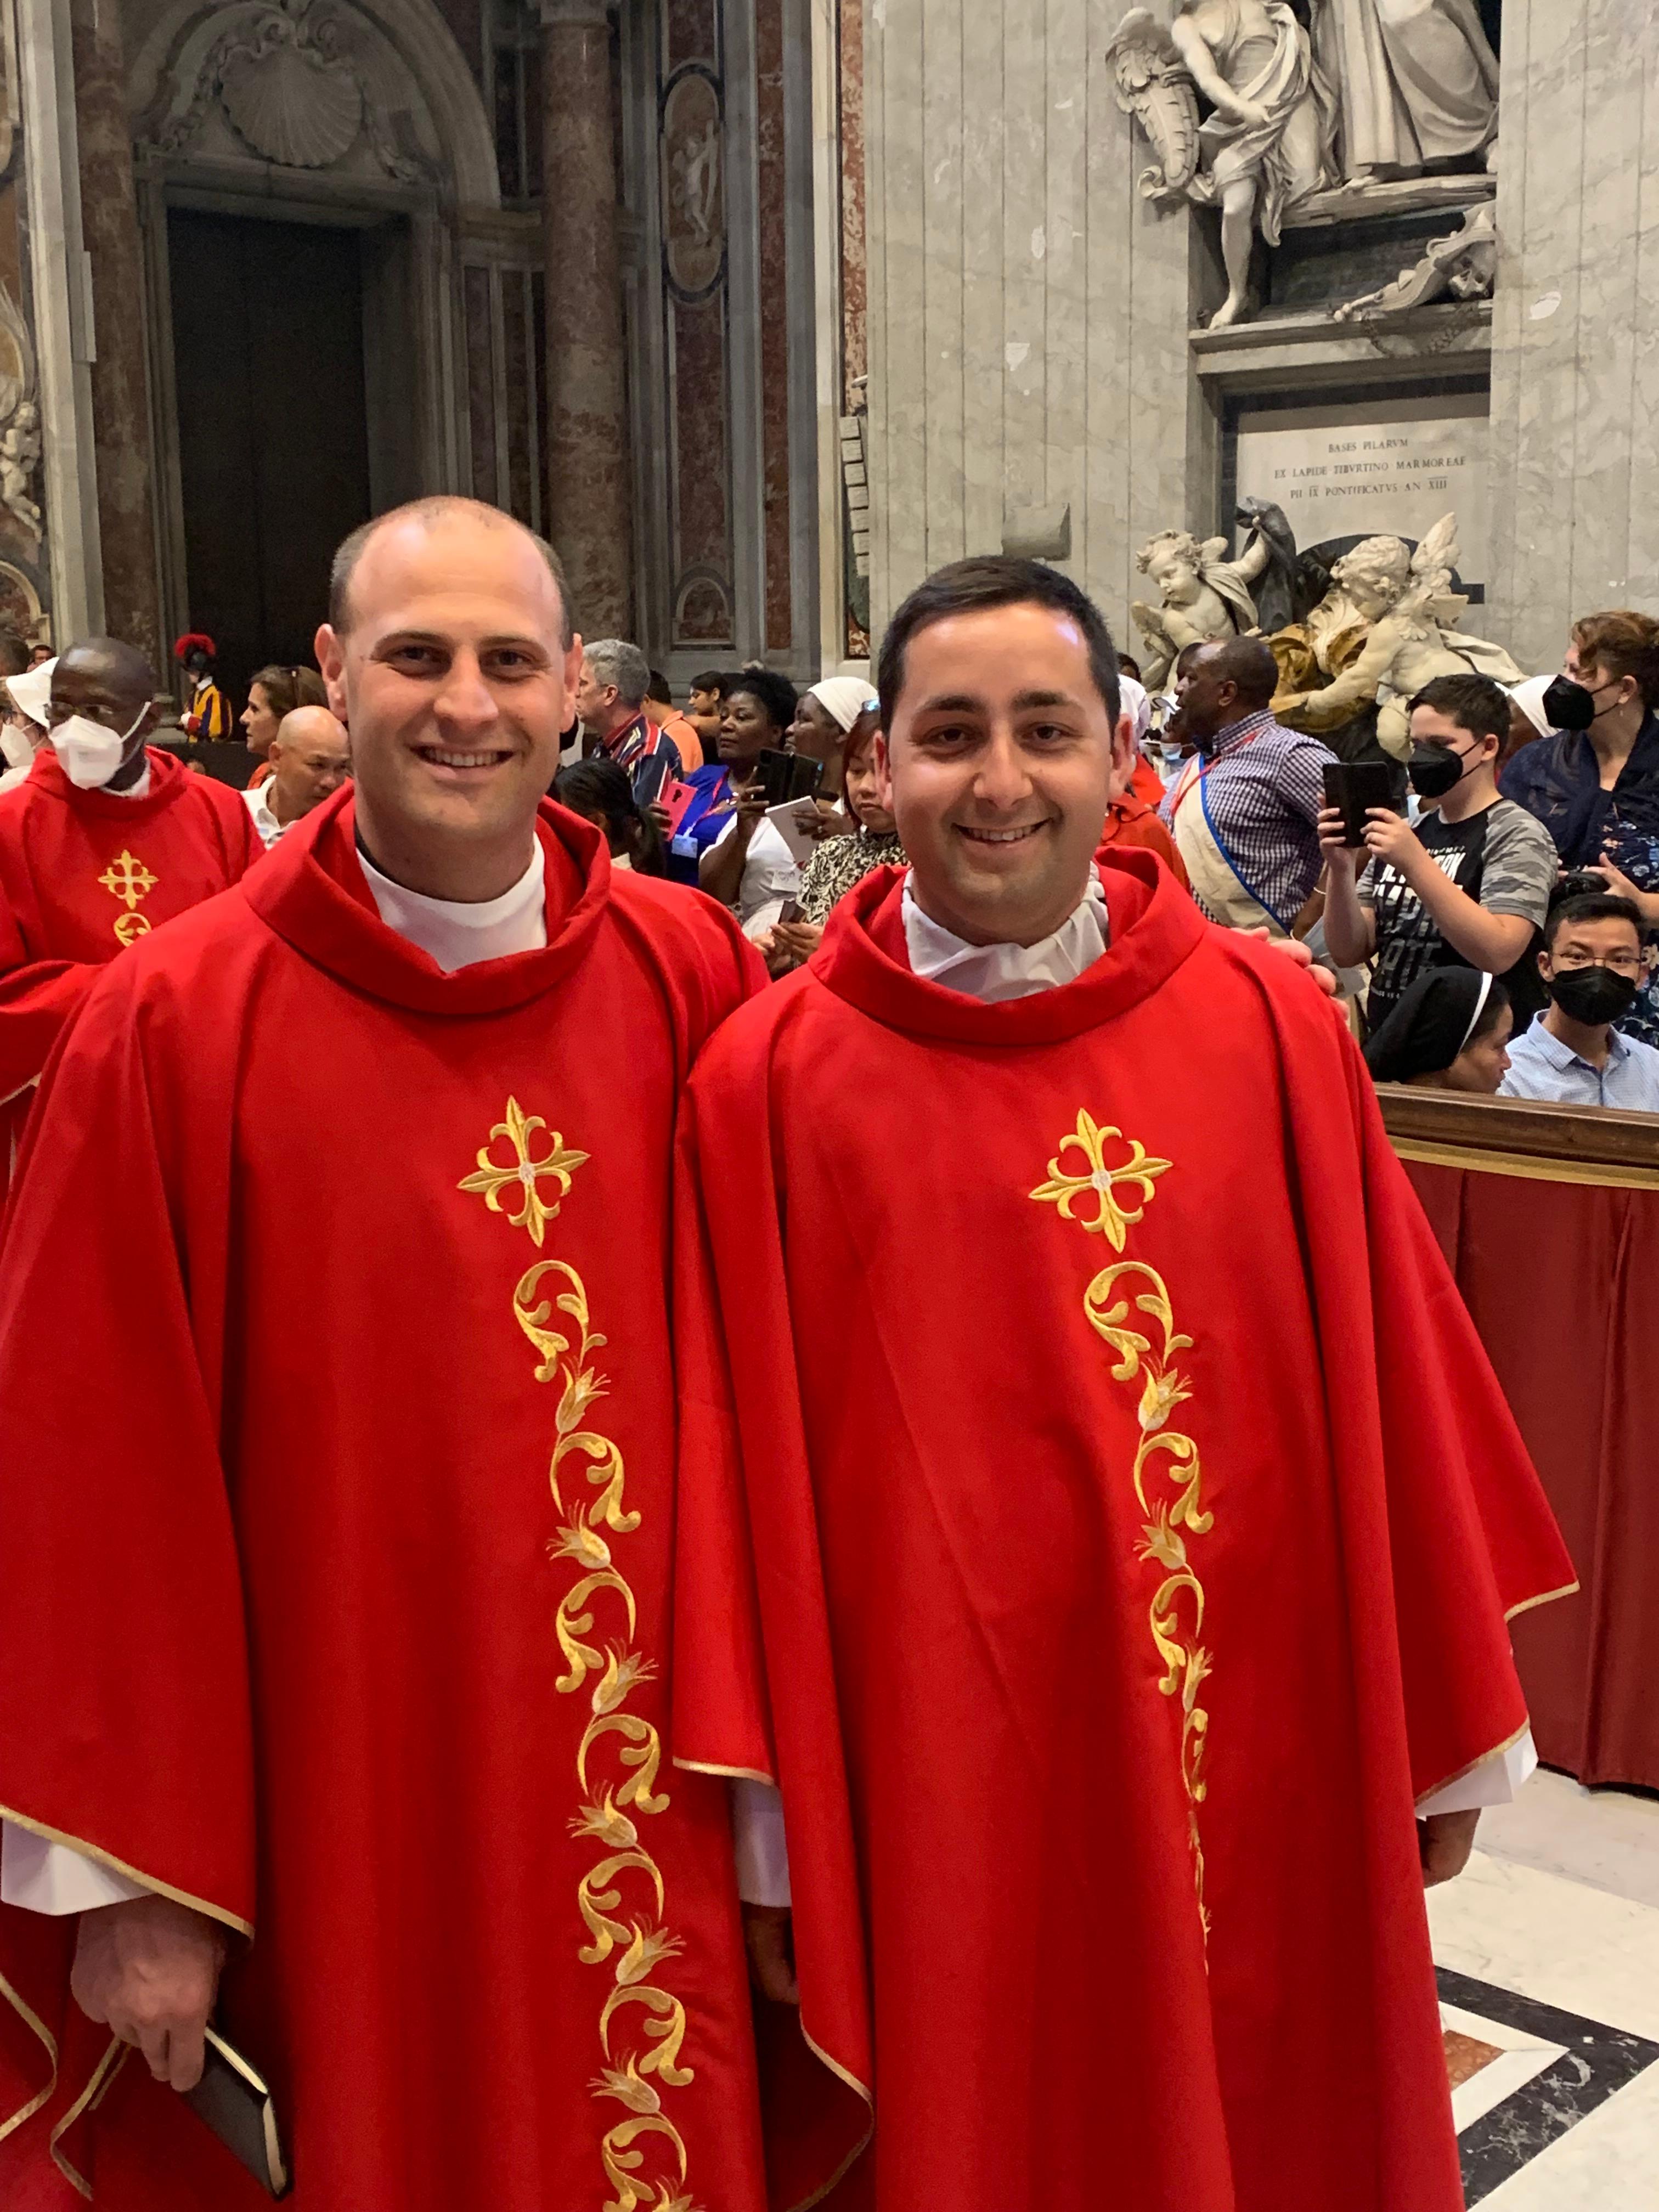 June 29, 2022: Father Vetter and Fr. Magnuson